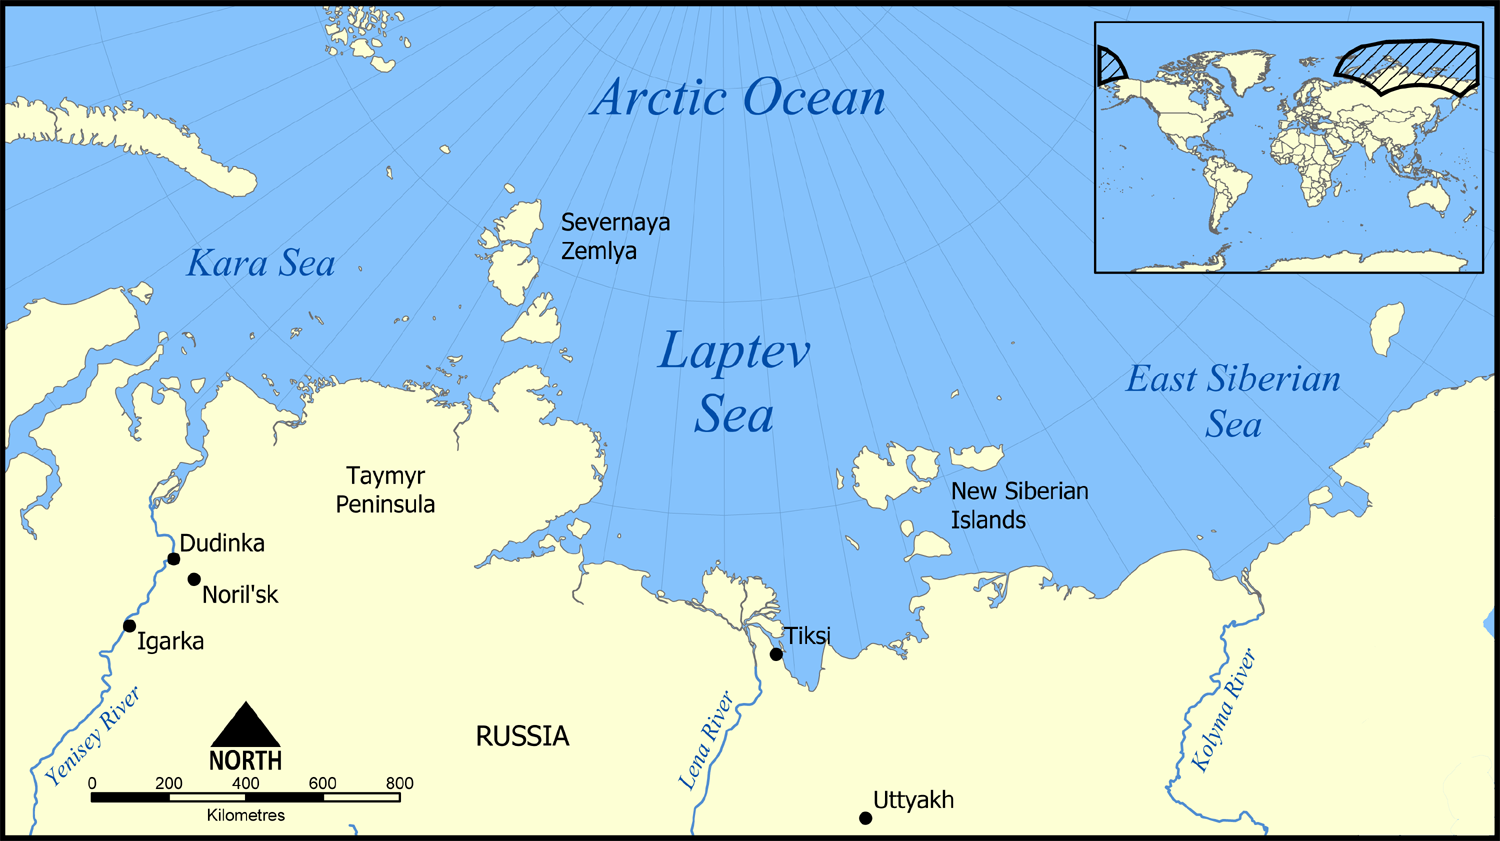 PICTURED: A map of the north-Russian coast, with Taymyr Peninsula drawing a line across the Arctic Circle to Wrangell Island, the unmarked white island in the east, where one can see the Kolyma River, above which are the Bear Islands. Photo credit: …